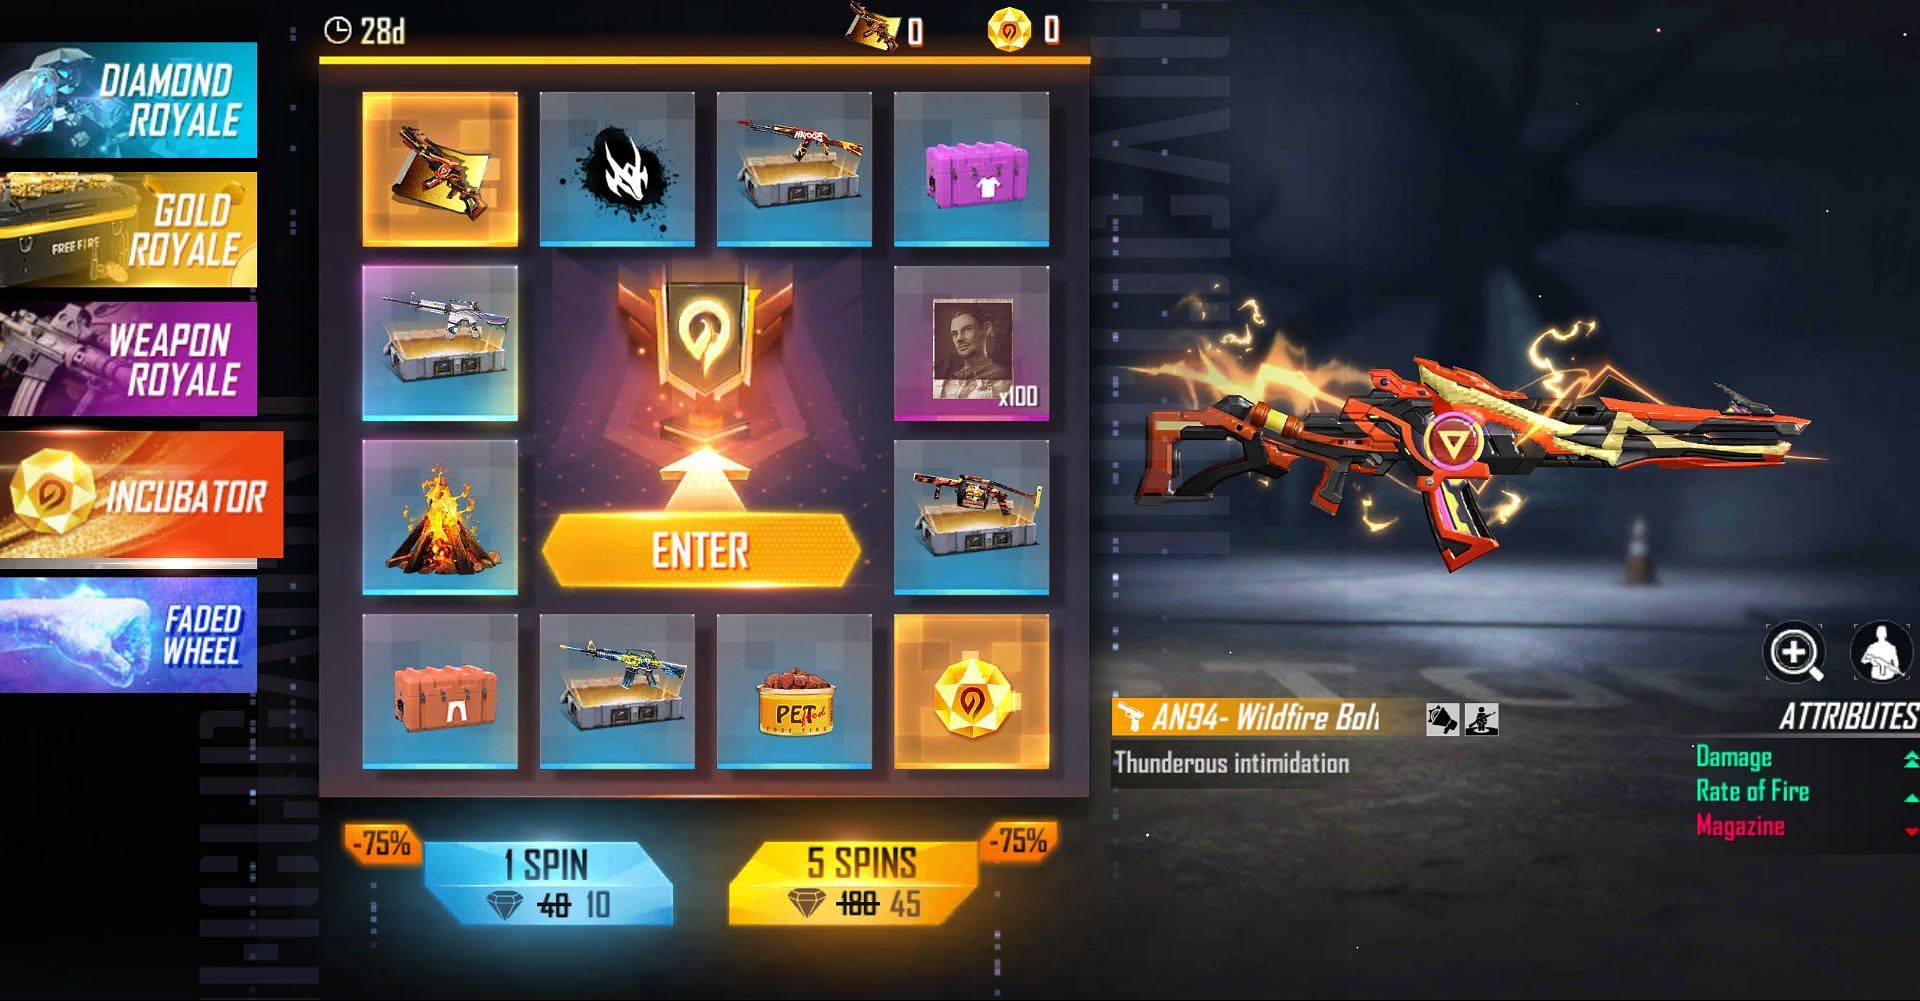 Five spins will require a total of 45 diamonds (Image via Free Fire)